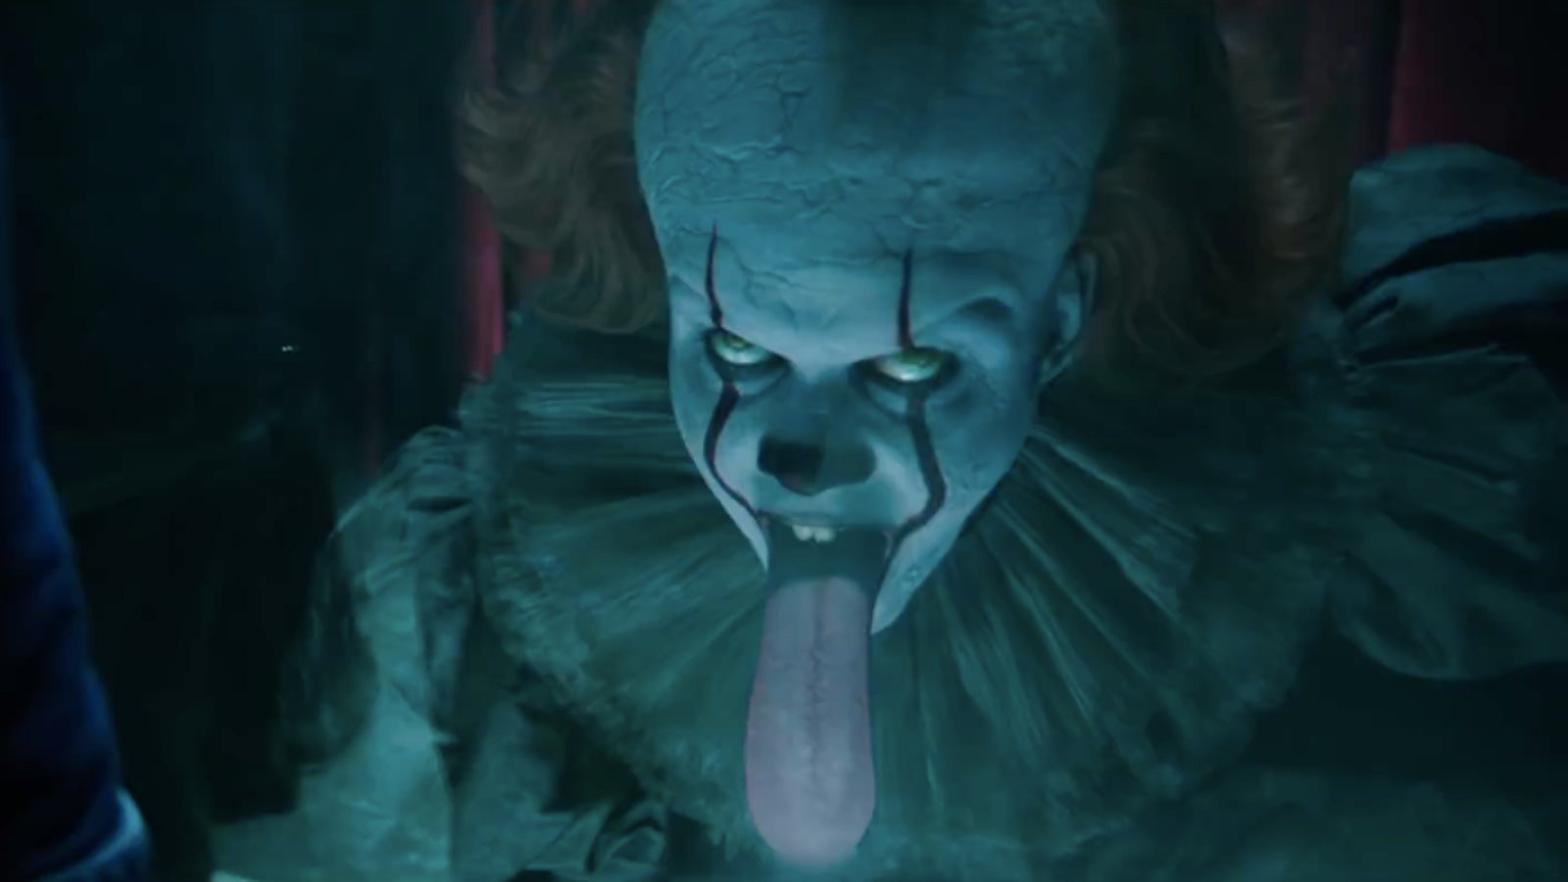 Lick it or not, we'll be seeing more from the world of It (pictured: Pennywise in It: Chapter Two) on HBO Max soon. (Image: Warner Bros.)